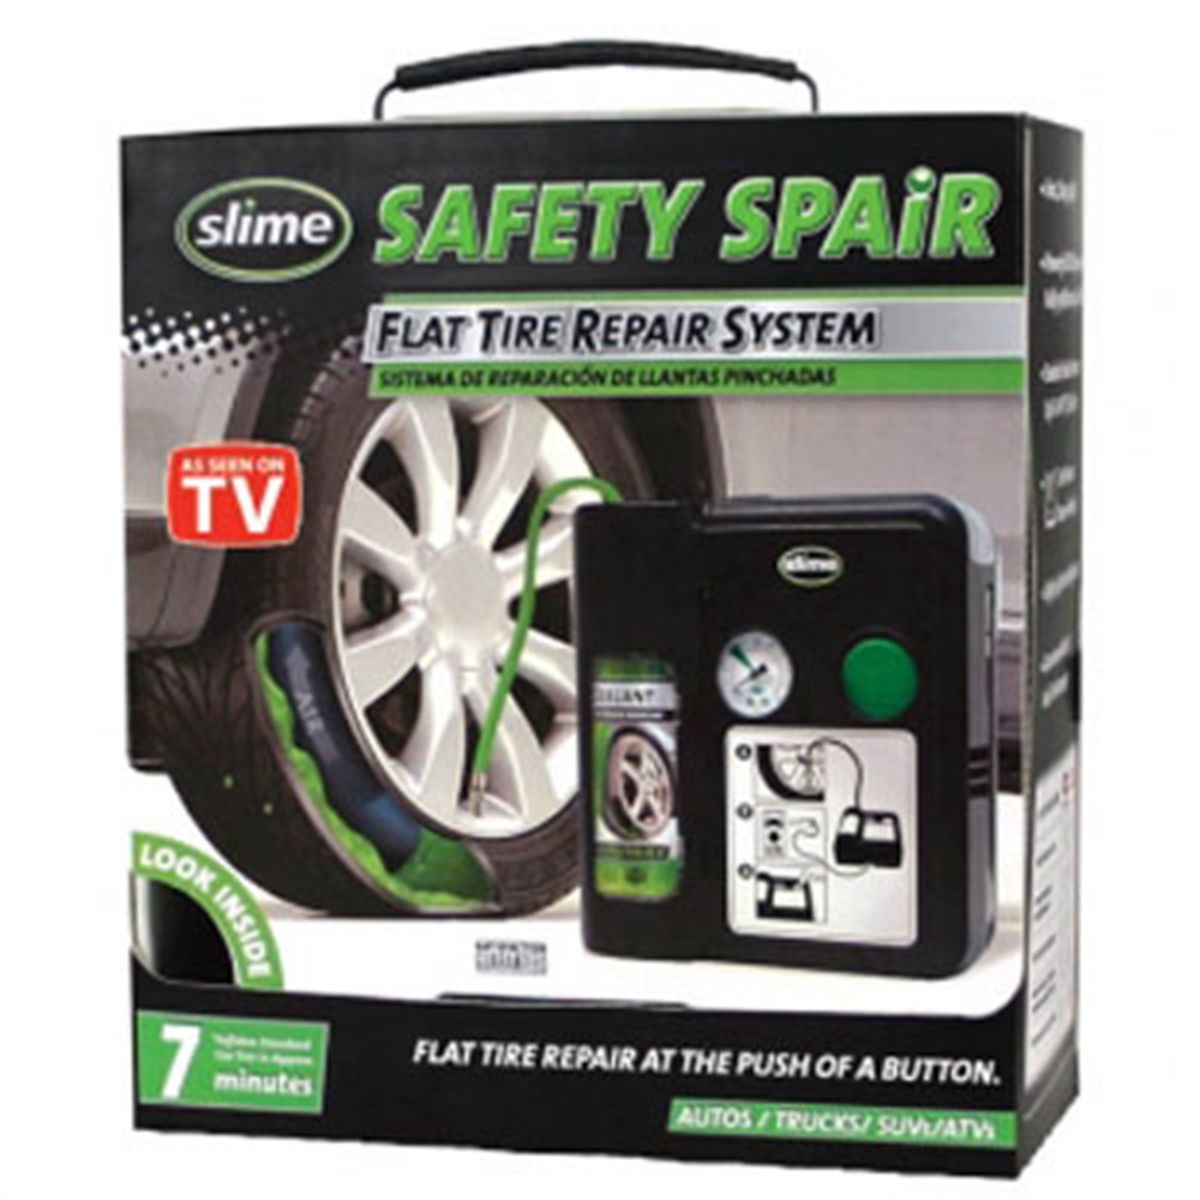 7 minute safety spare